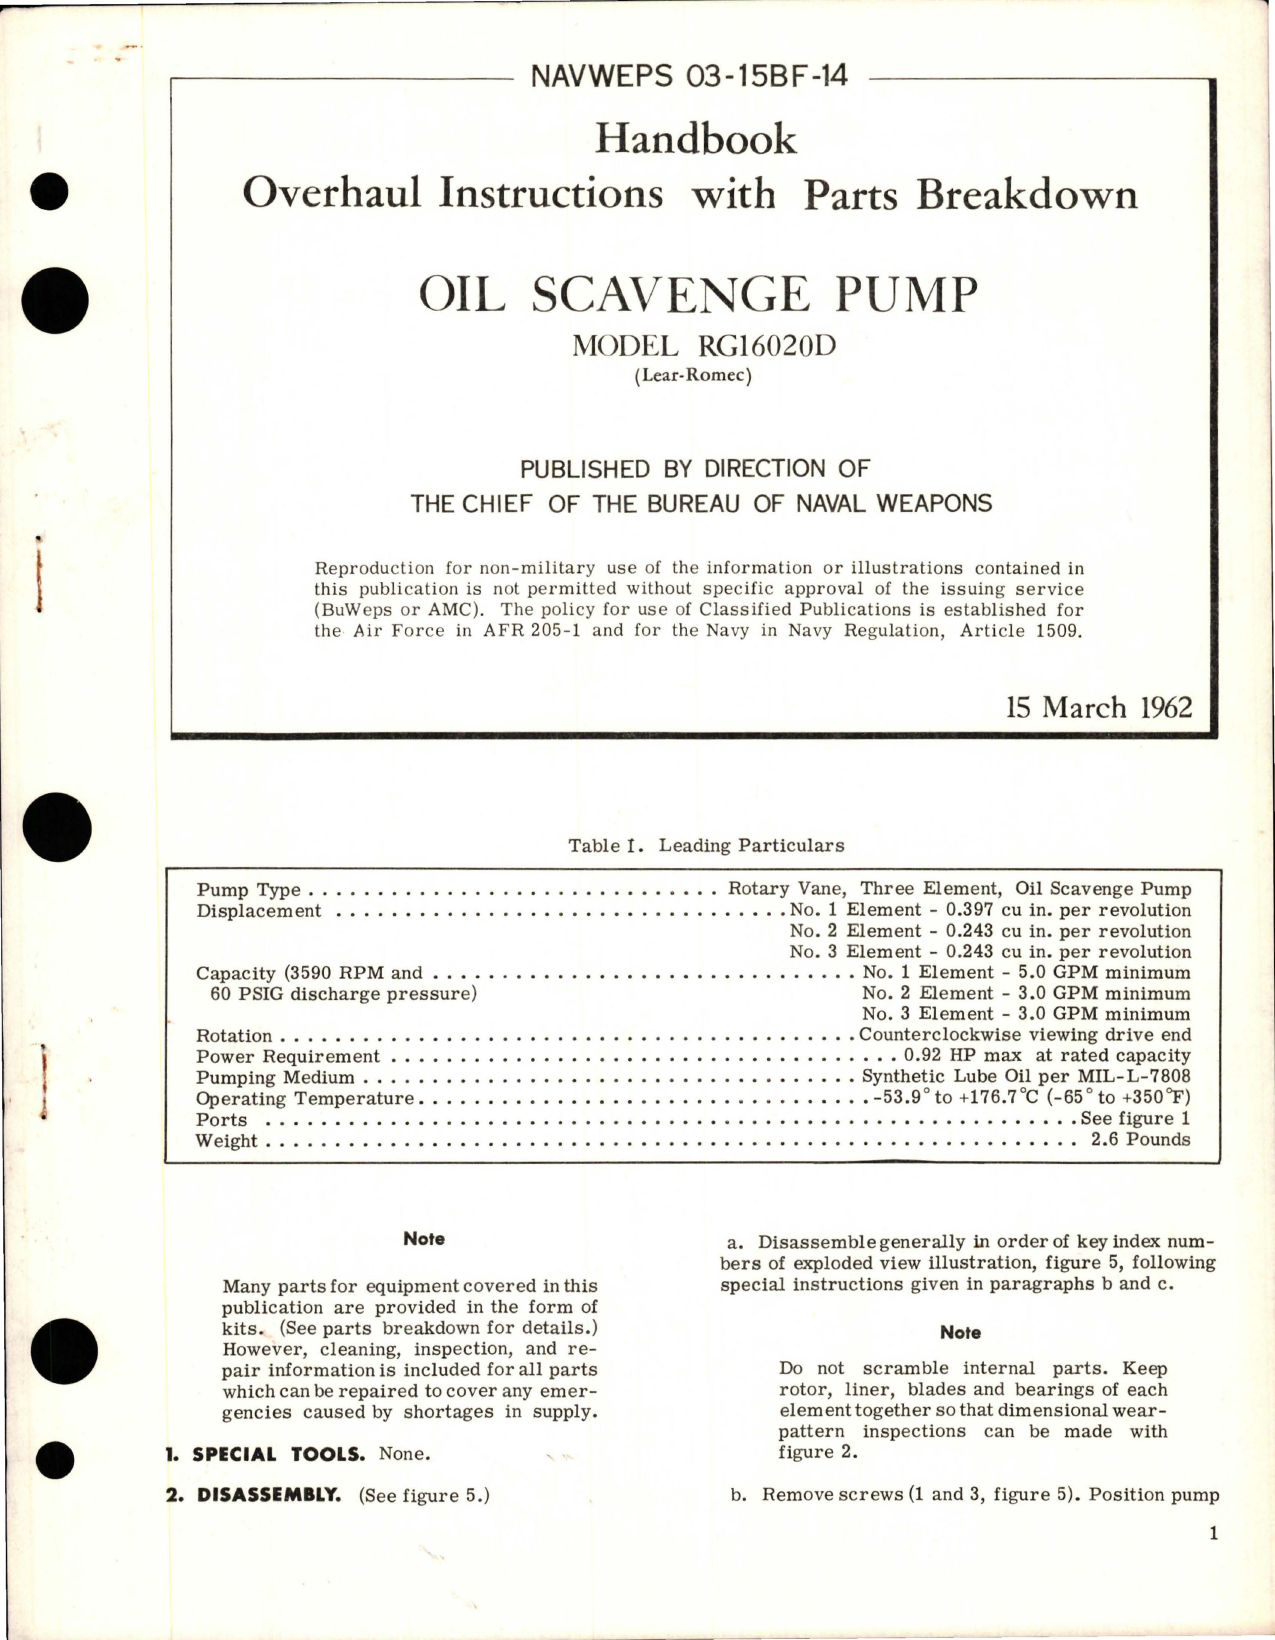 Sample page 1 from AirCorps Library document: Overhaul Instructions with Parts Breakdown for Oil Scavenge Pump - Model RG16020D